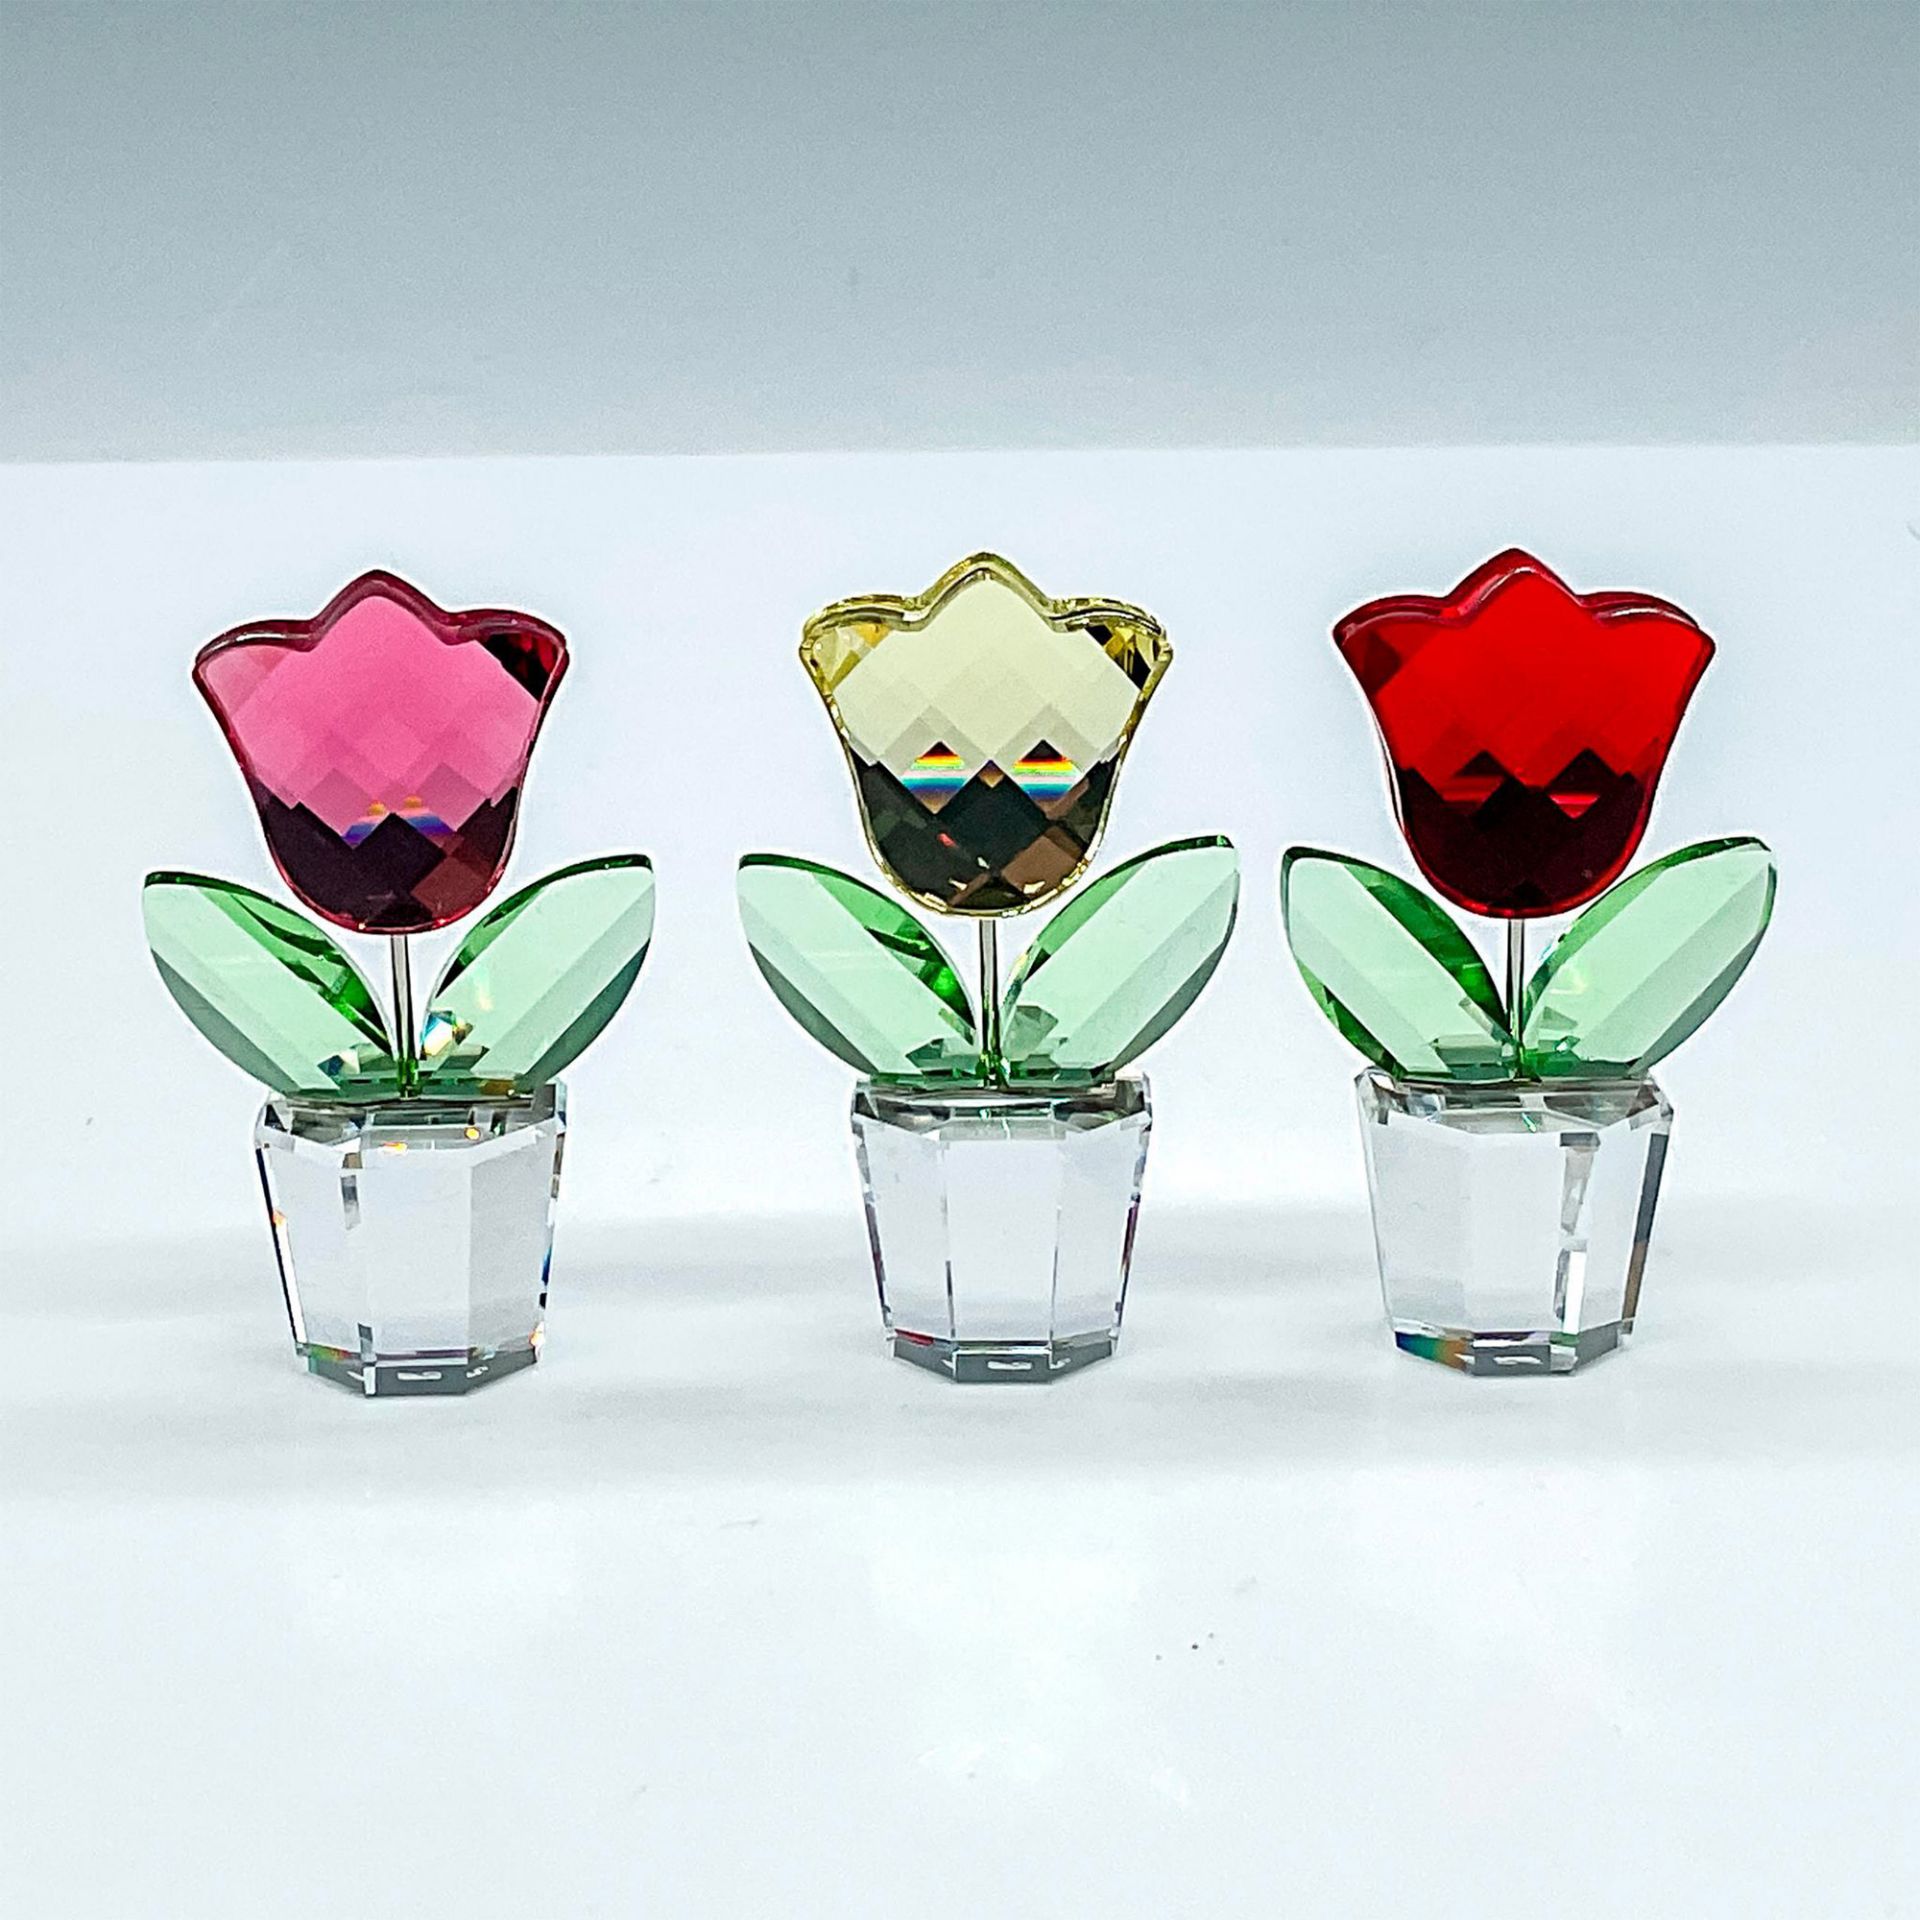 3pc Swarovski Crystal Flowers, Colored Tulips in Pots - Image 3 of 4